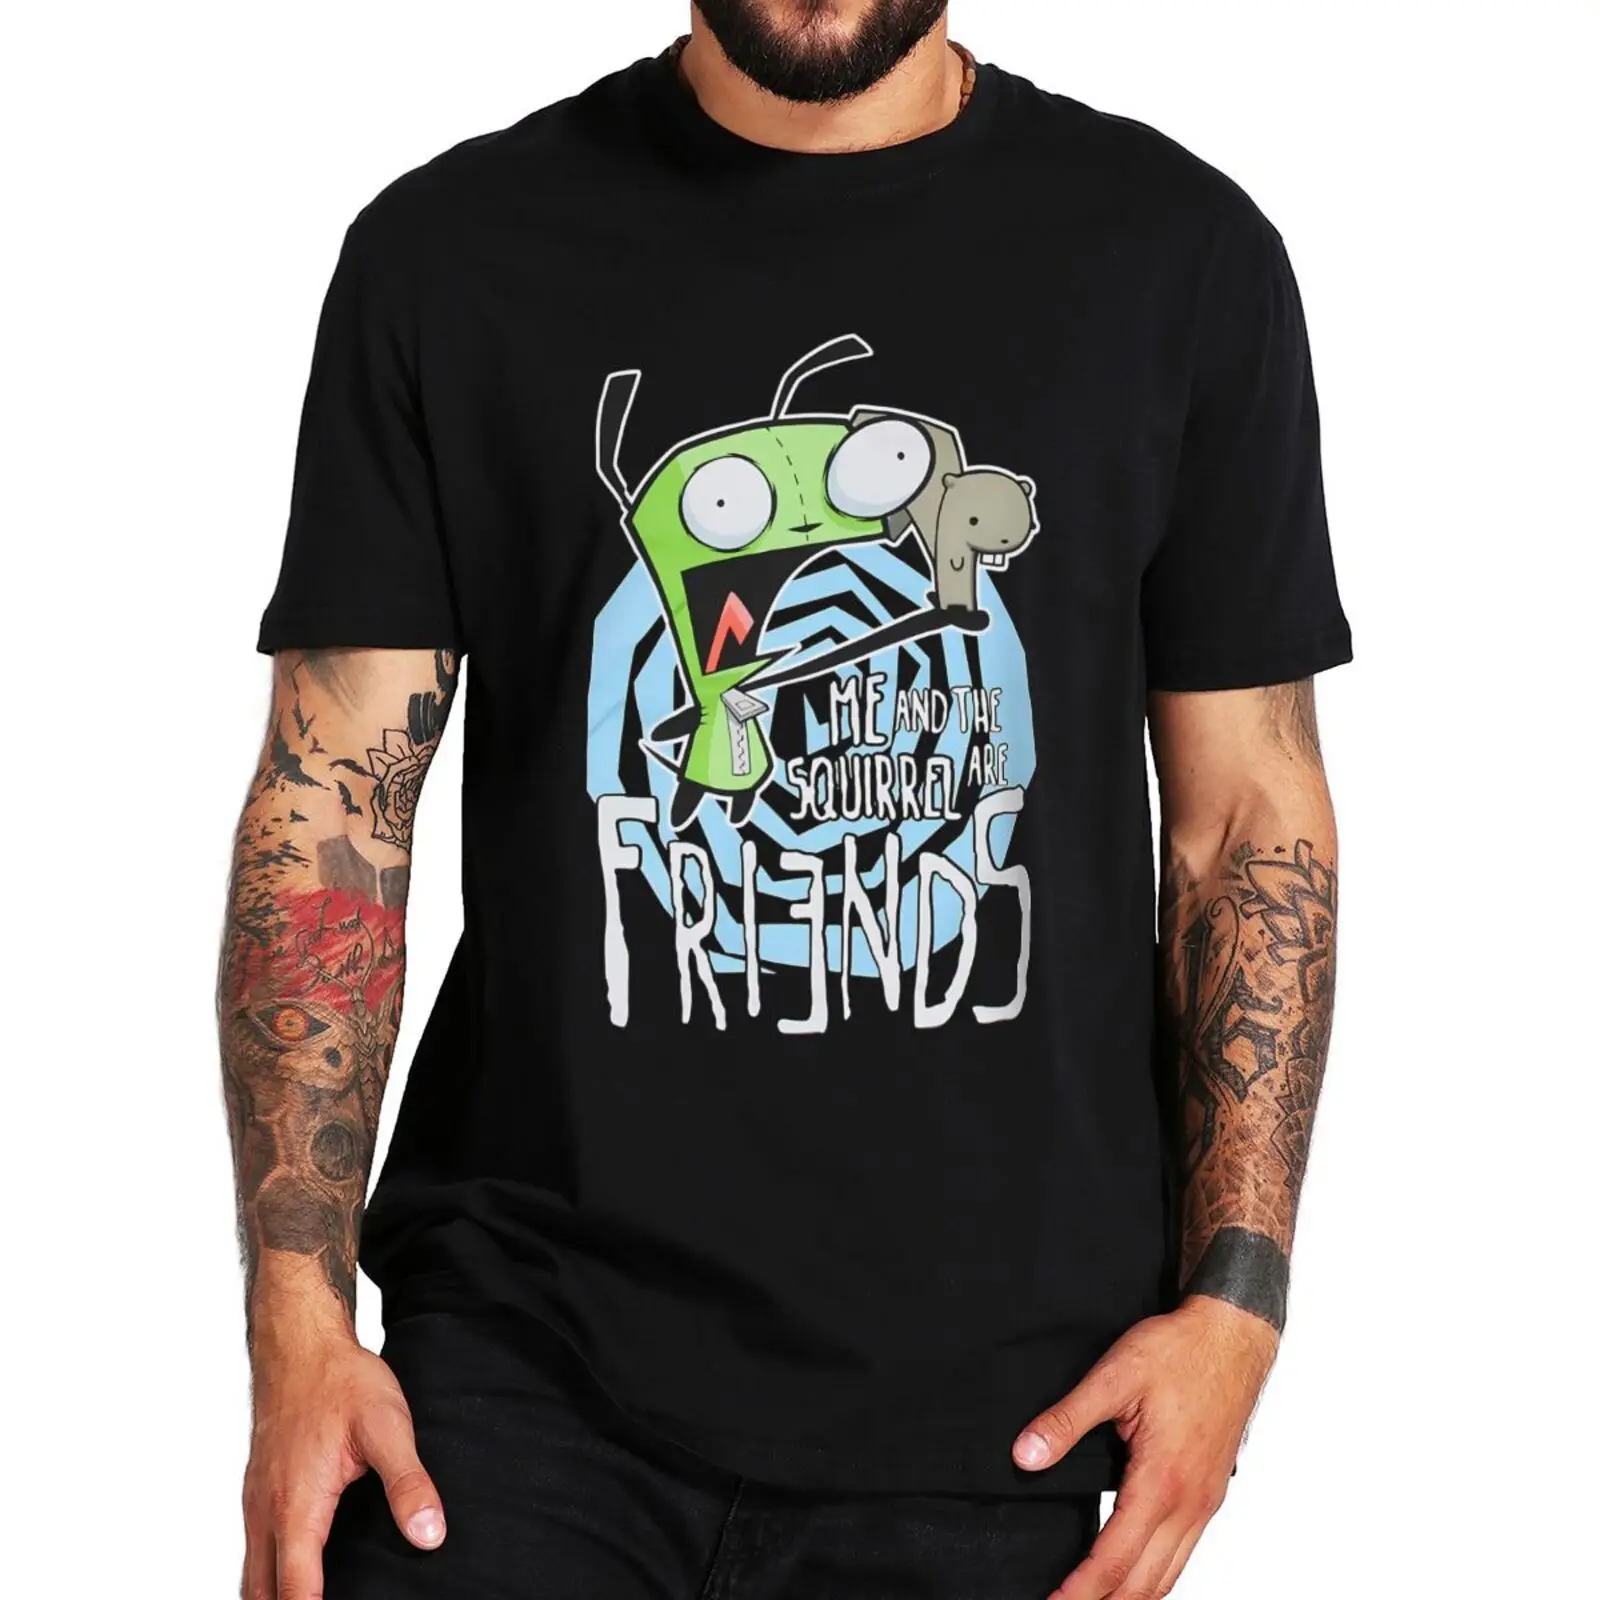 Invader-Zim-Me-And-The-Are-Friends-T-Shirt-Animated-Dark-Comedy-TV ...